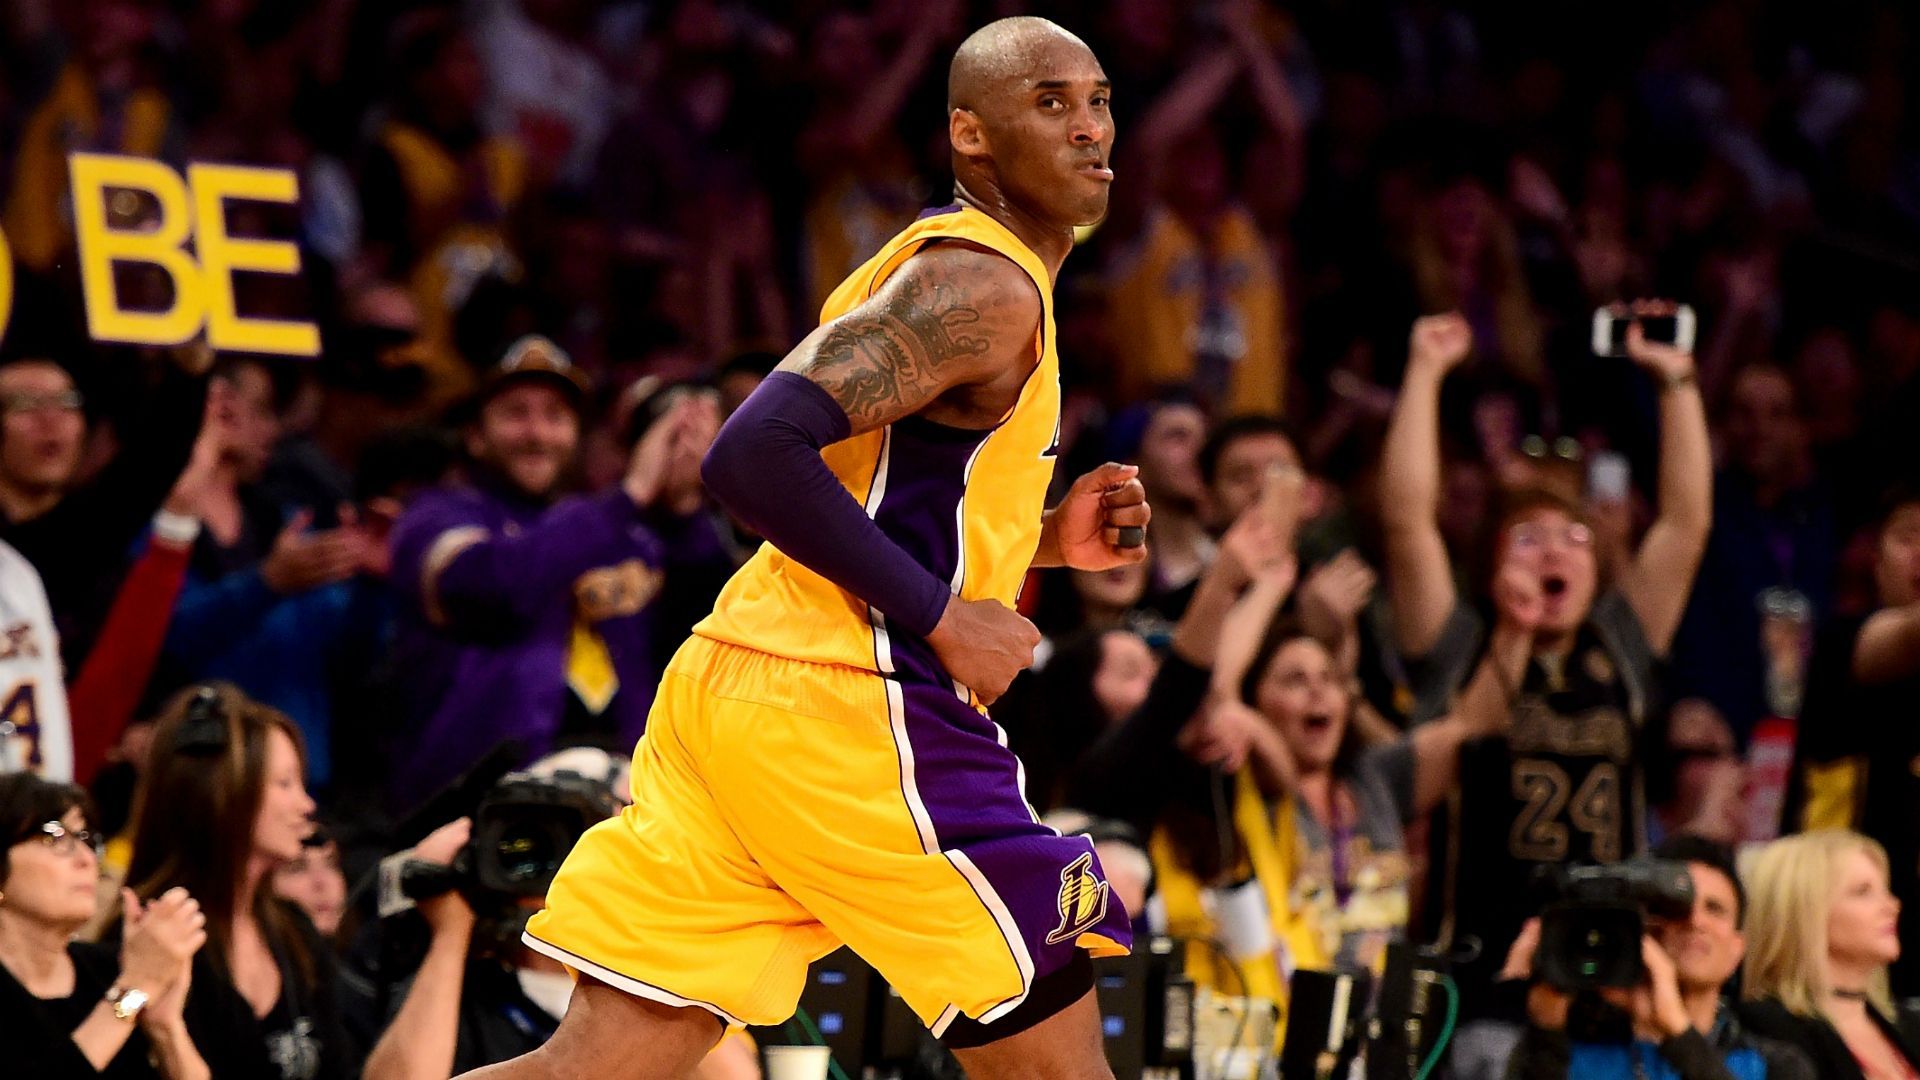 Kobe Bryant dead: His final NBA game by the numbers.